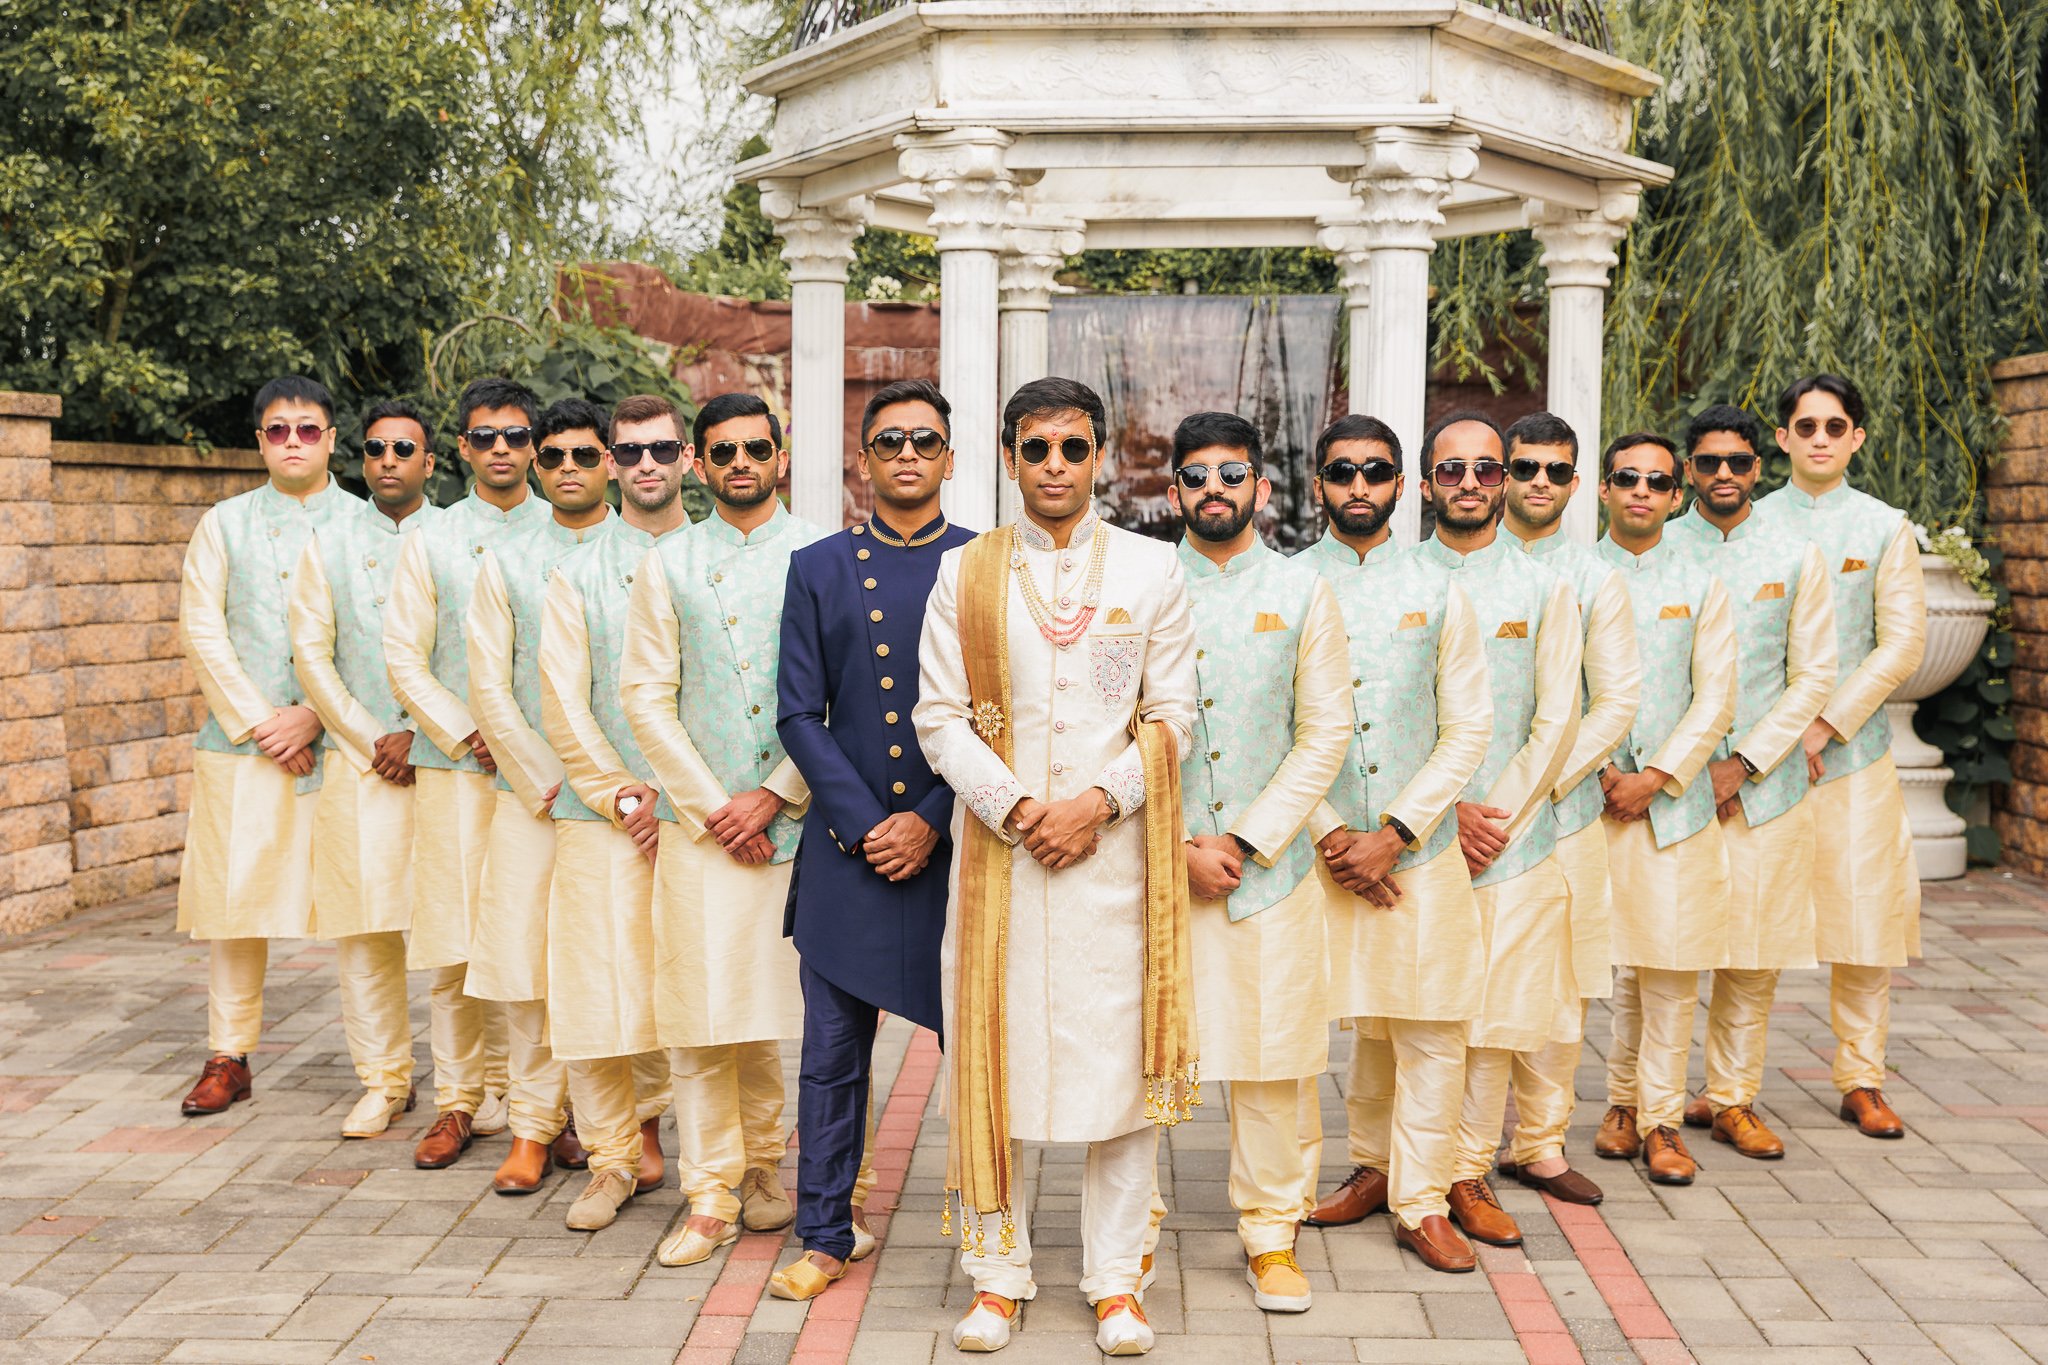 Group photos of groom's men in traditional Indian outfit